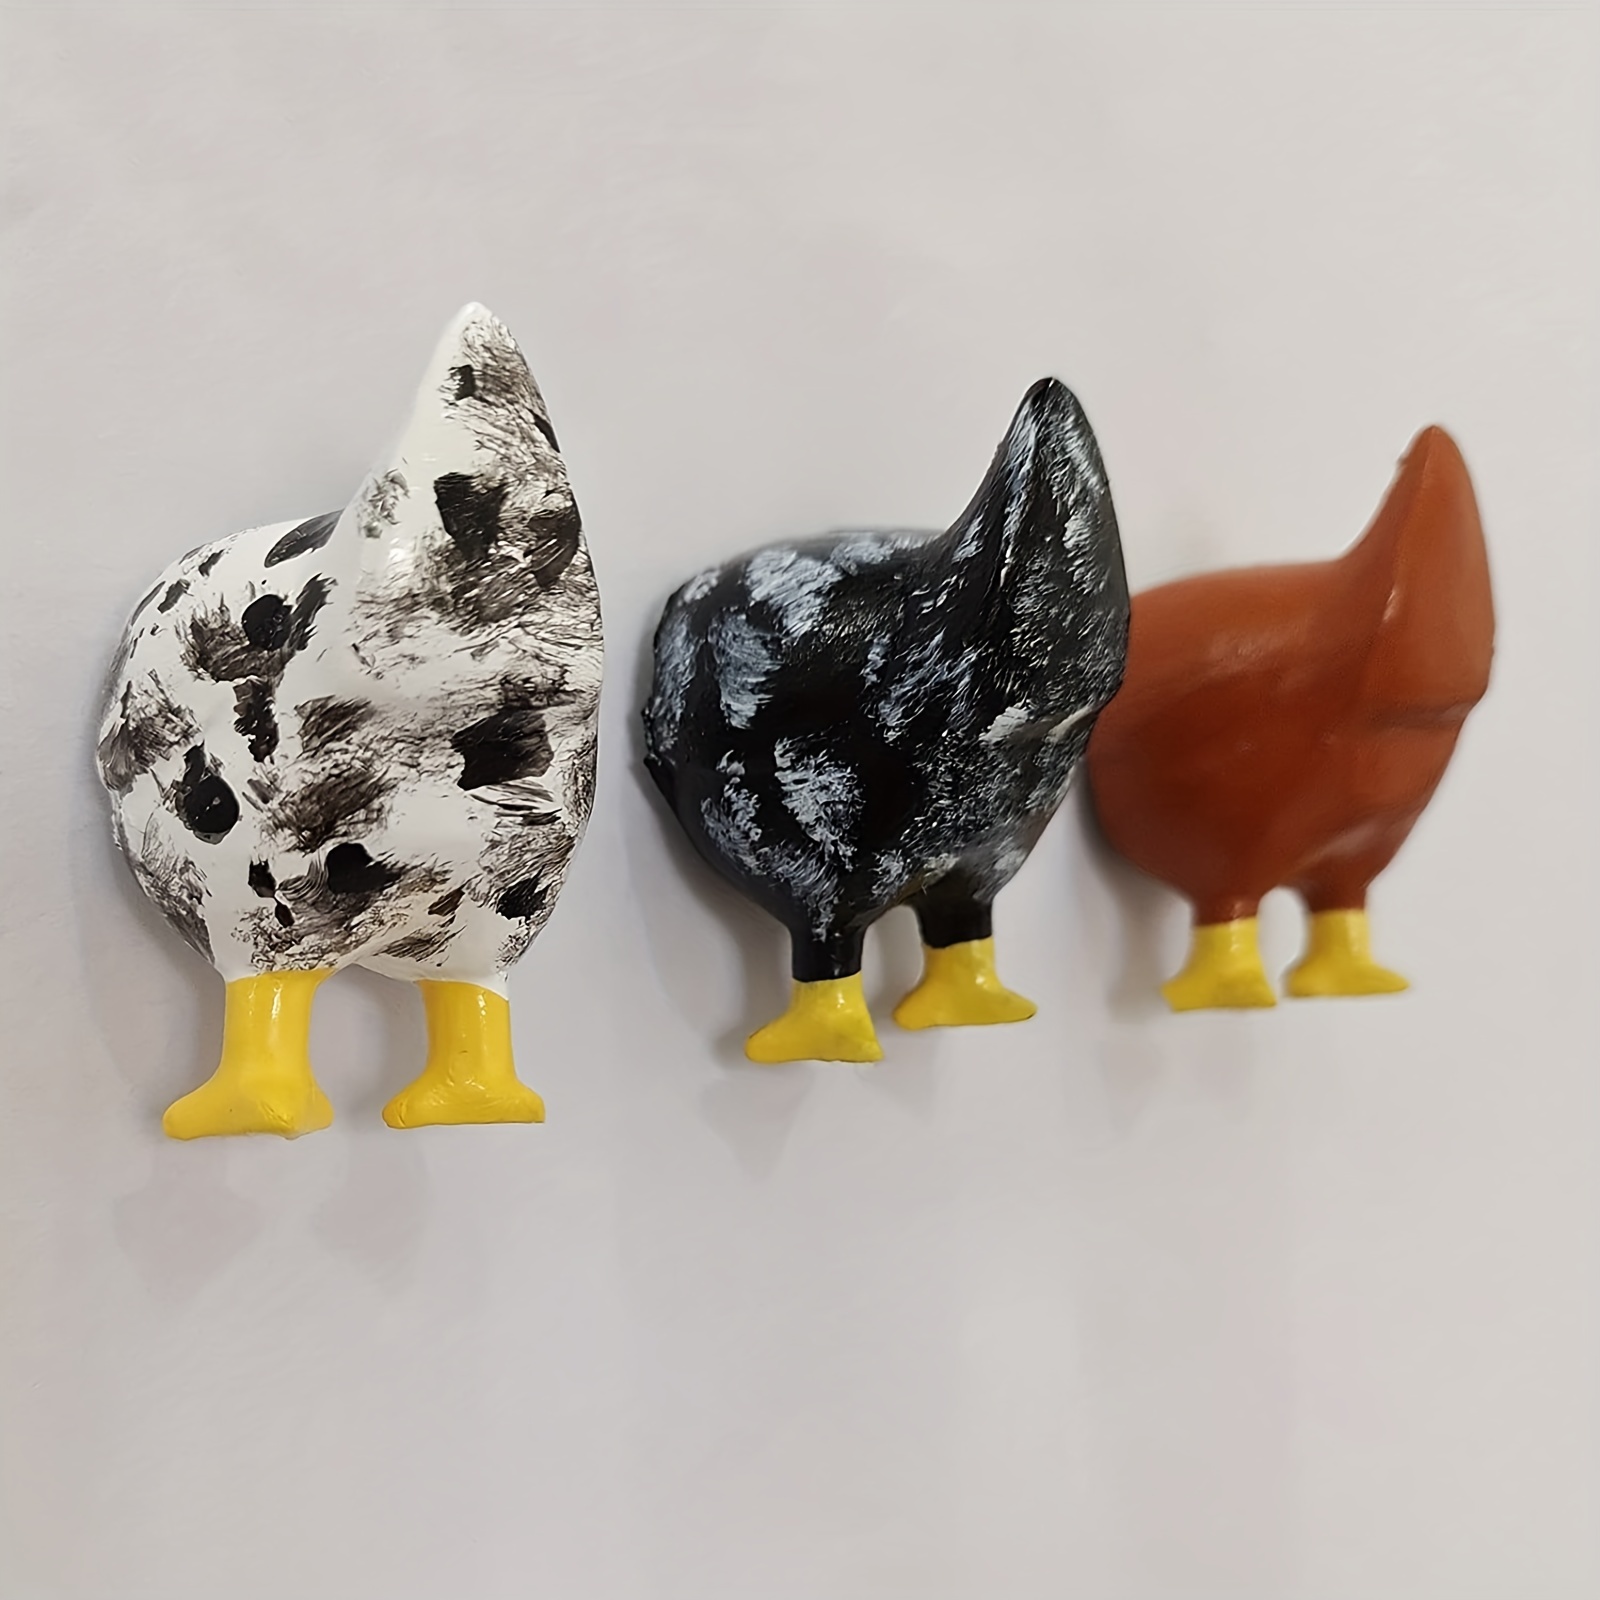  Farmhouse Style Decor 3pcs/Set Chicken Butt Fridge Magnets  Funny Animal Decor Gift Creative Refrigerator Magnets Home Accessories  Chick Butt Magnet Mix Color : Home & Kitchen